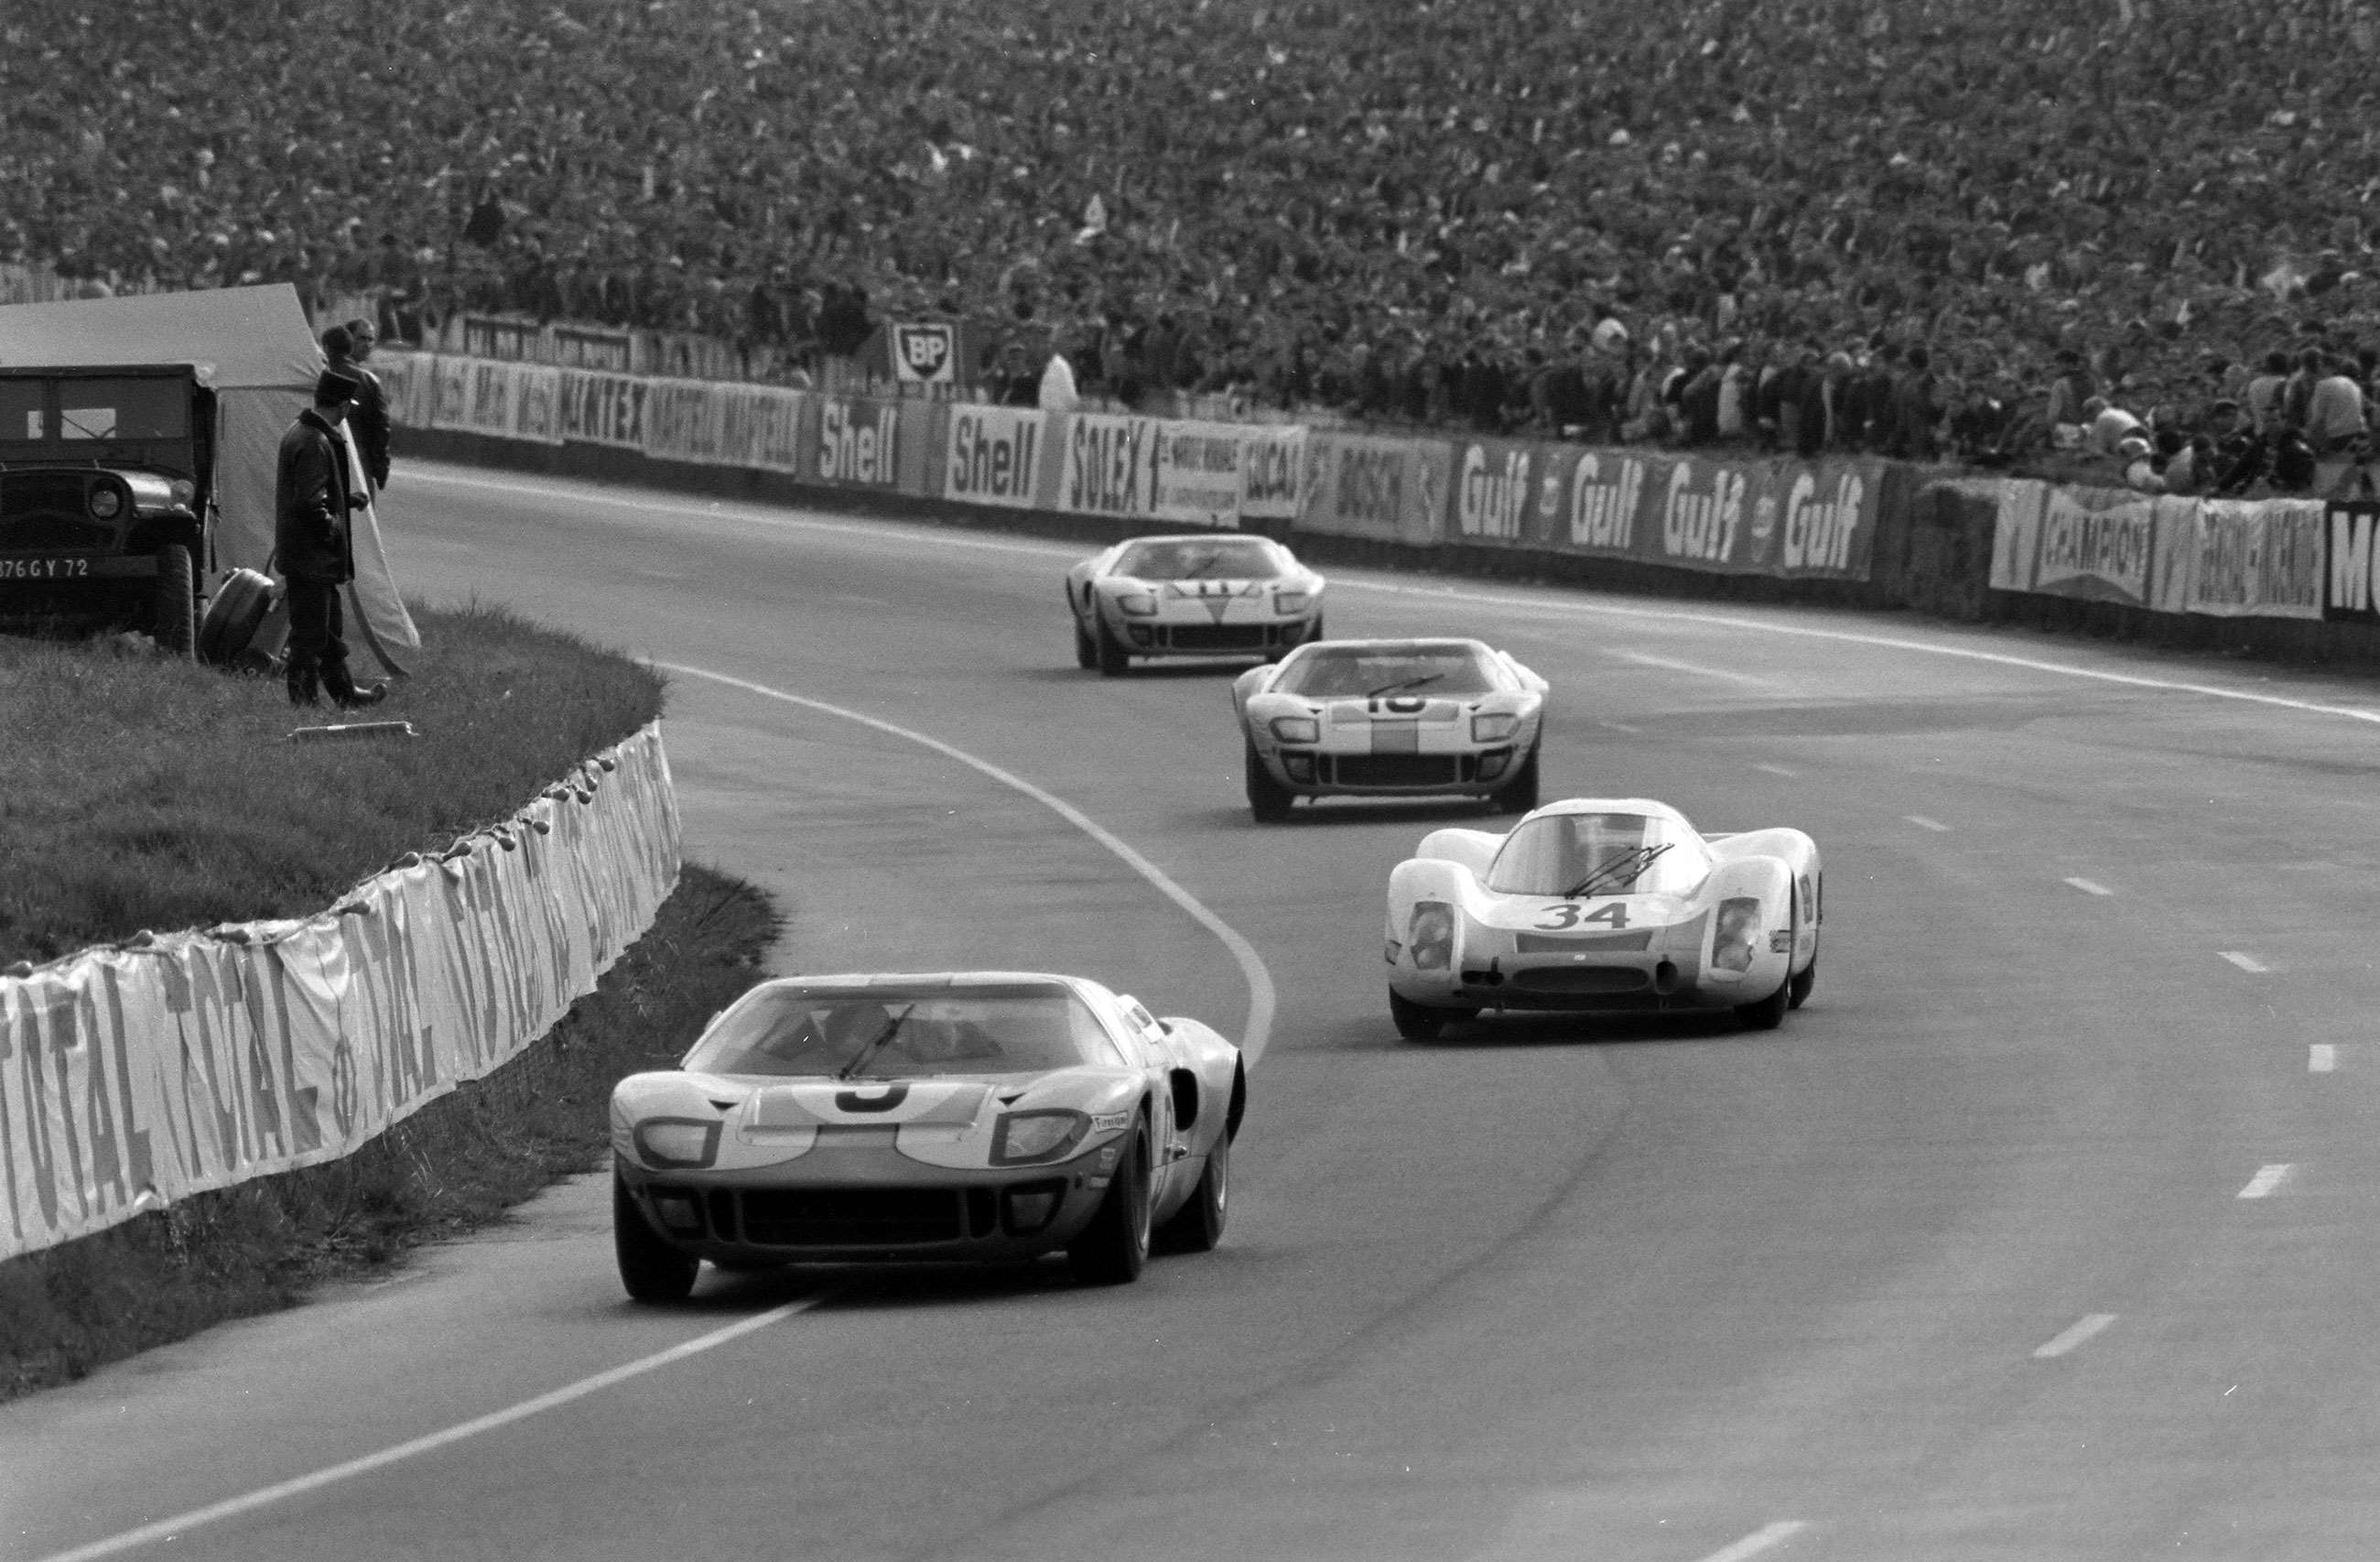 The Ford GT40 of Pedro Rodriguez and Lucien Bianchi being chased by the Porsche 908 of Joe Buzzetta and Scooter Patrick. Behind, the Ford GT40s of Paul Hawkins and David Hobbs, then Brian Muir and Jackie Oliver.